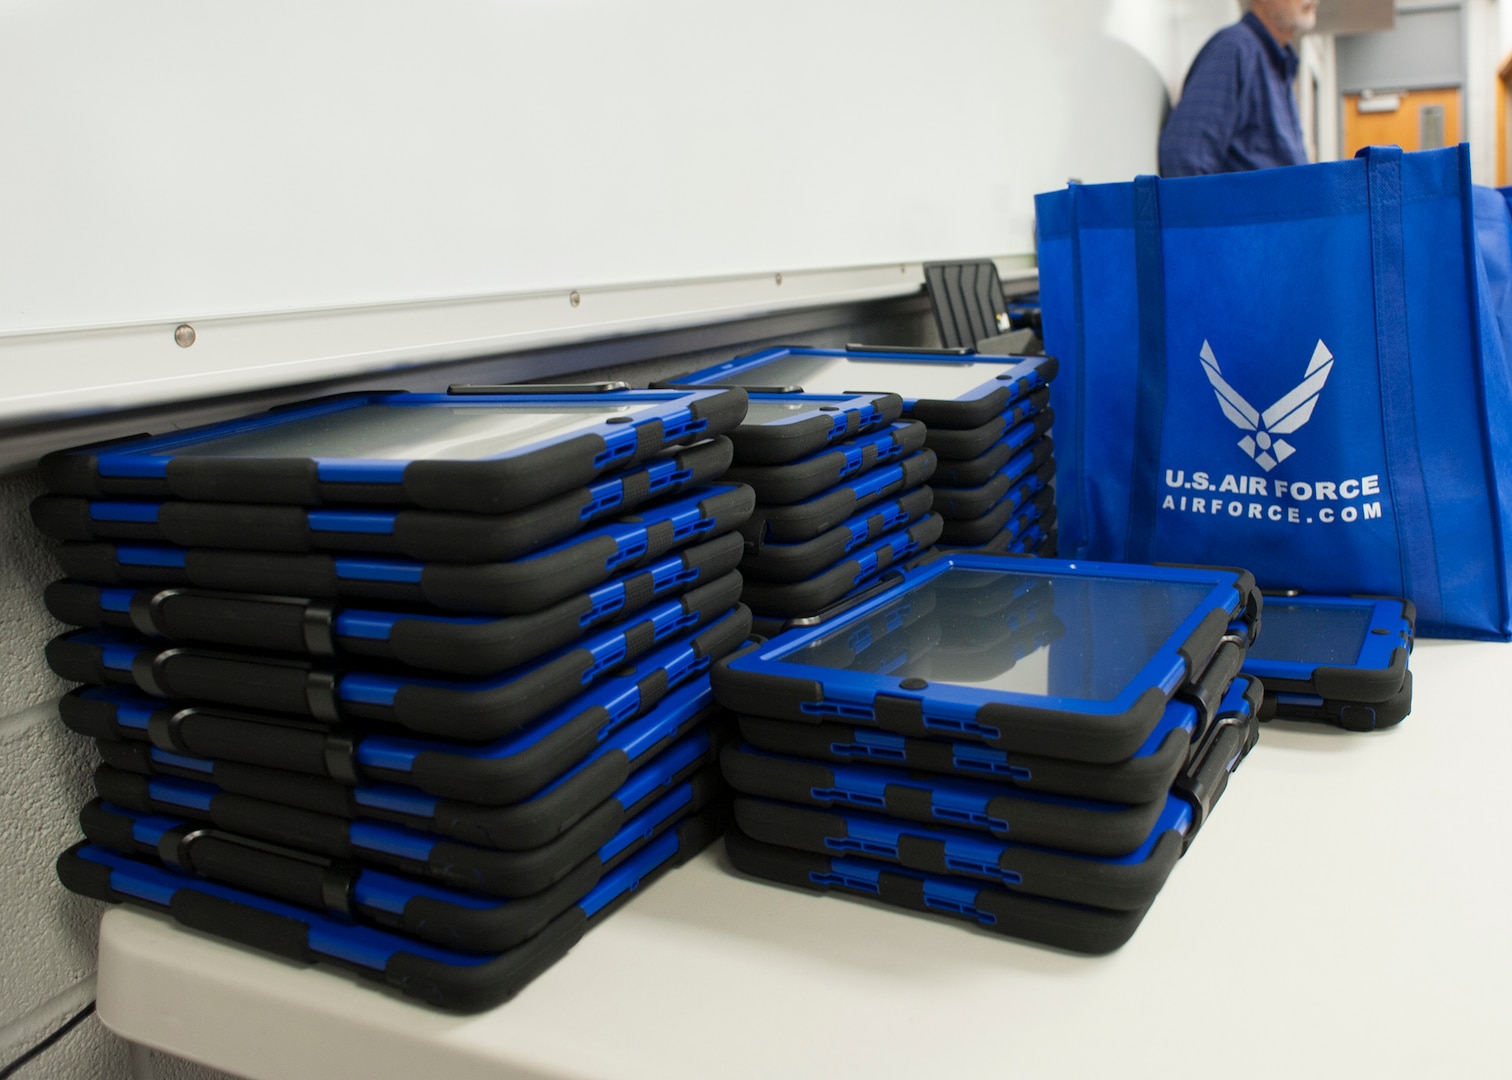 The Randolph Field Independent School District received about 1,000 iPads for students to use this school year as part of a $1.7 million Department of Defense educational grant. (U.S. Air Force photo by Melissa Peterson)